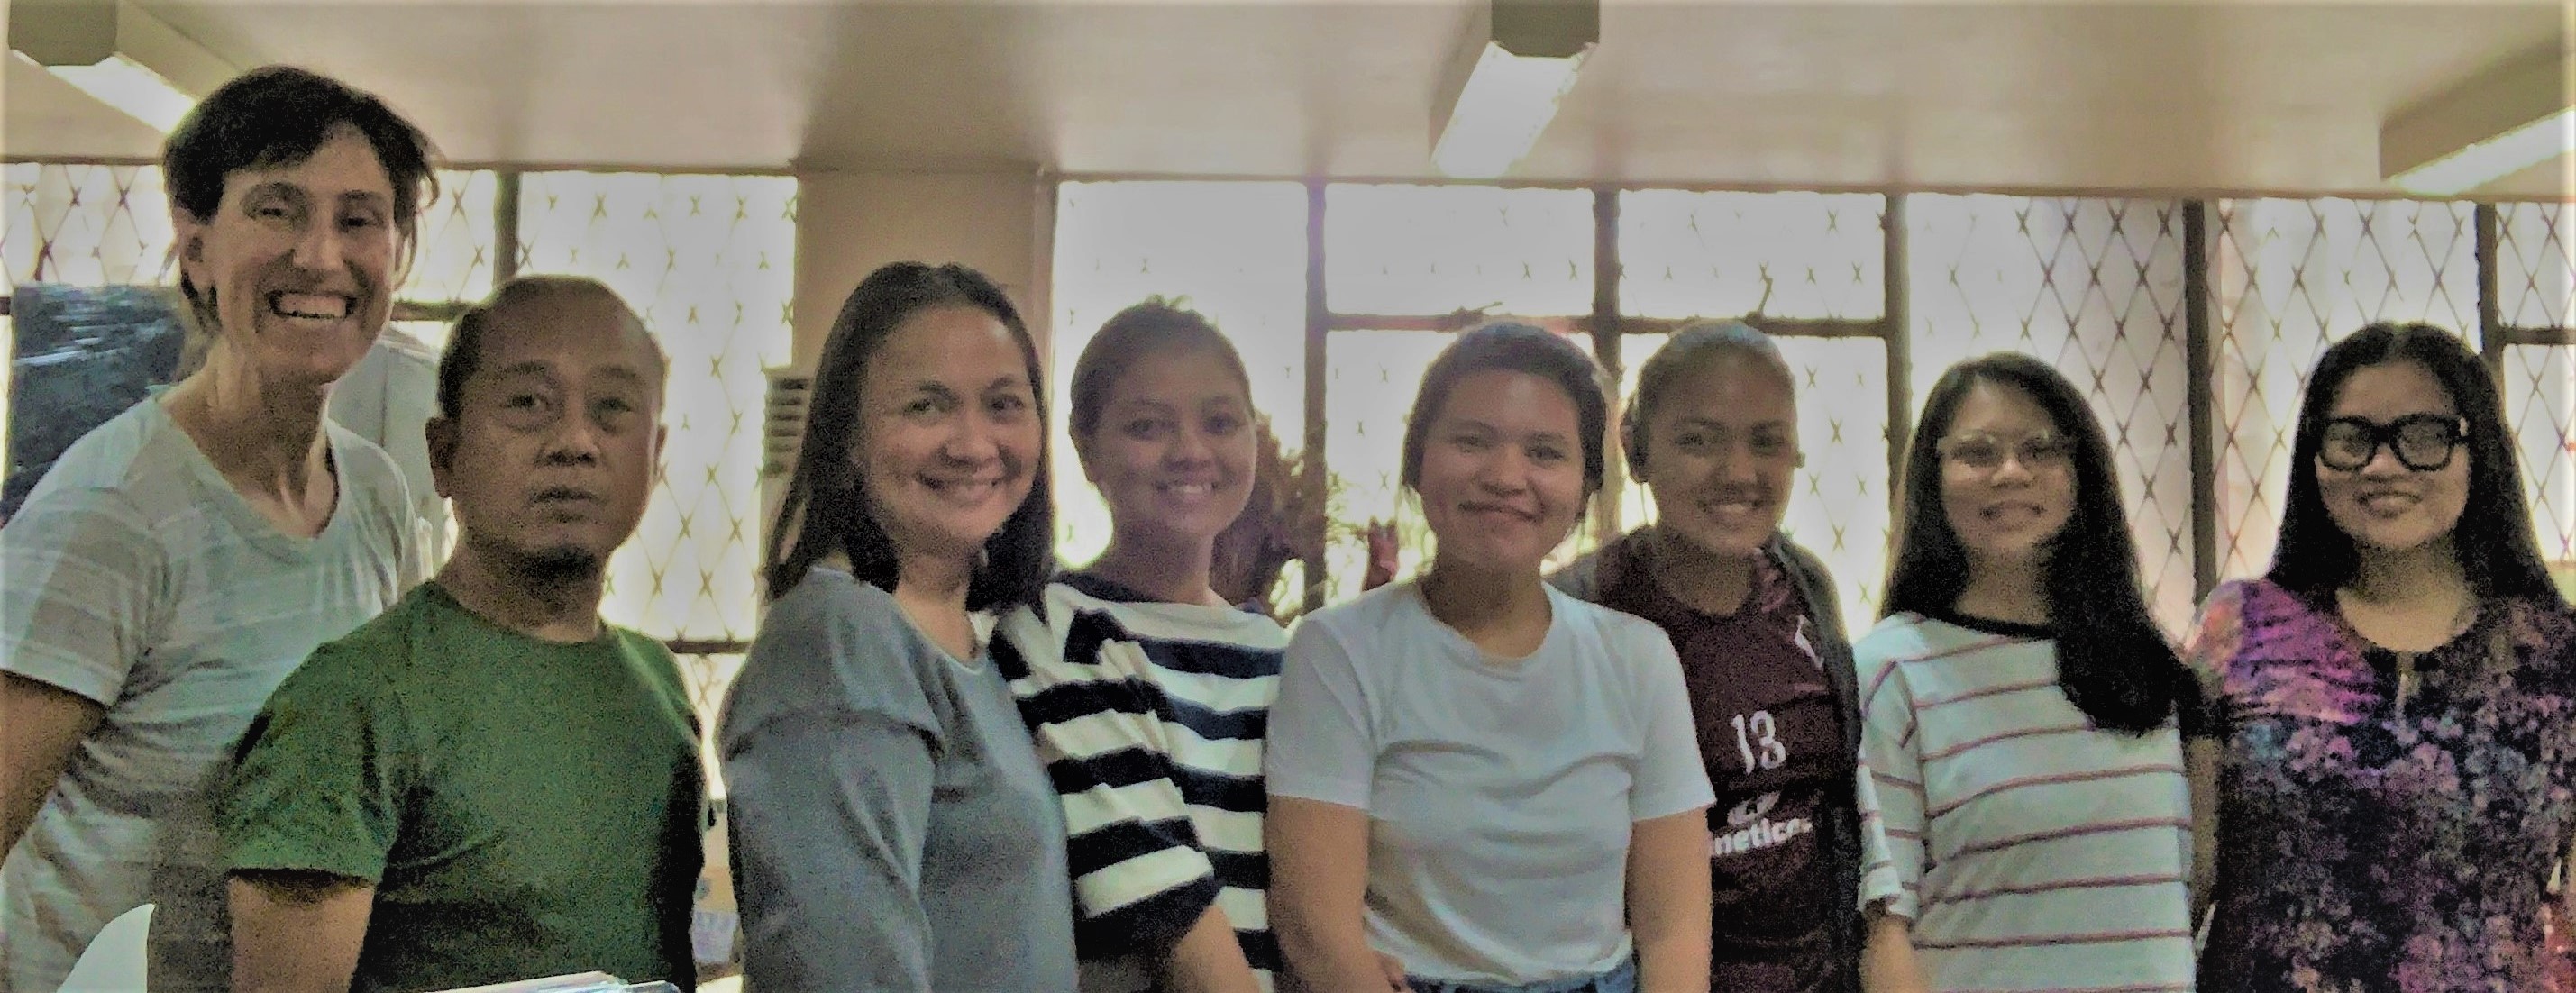 Dr. Karen Miller (at left) with members of the faculty and staff at the Center for International Studies, University of the Philippines